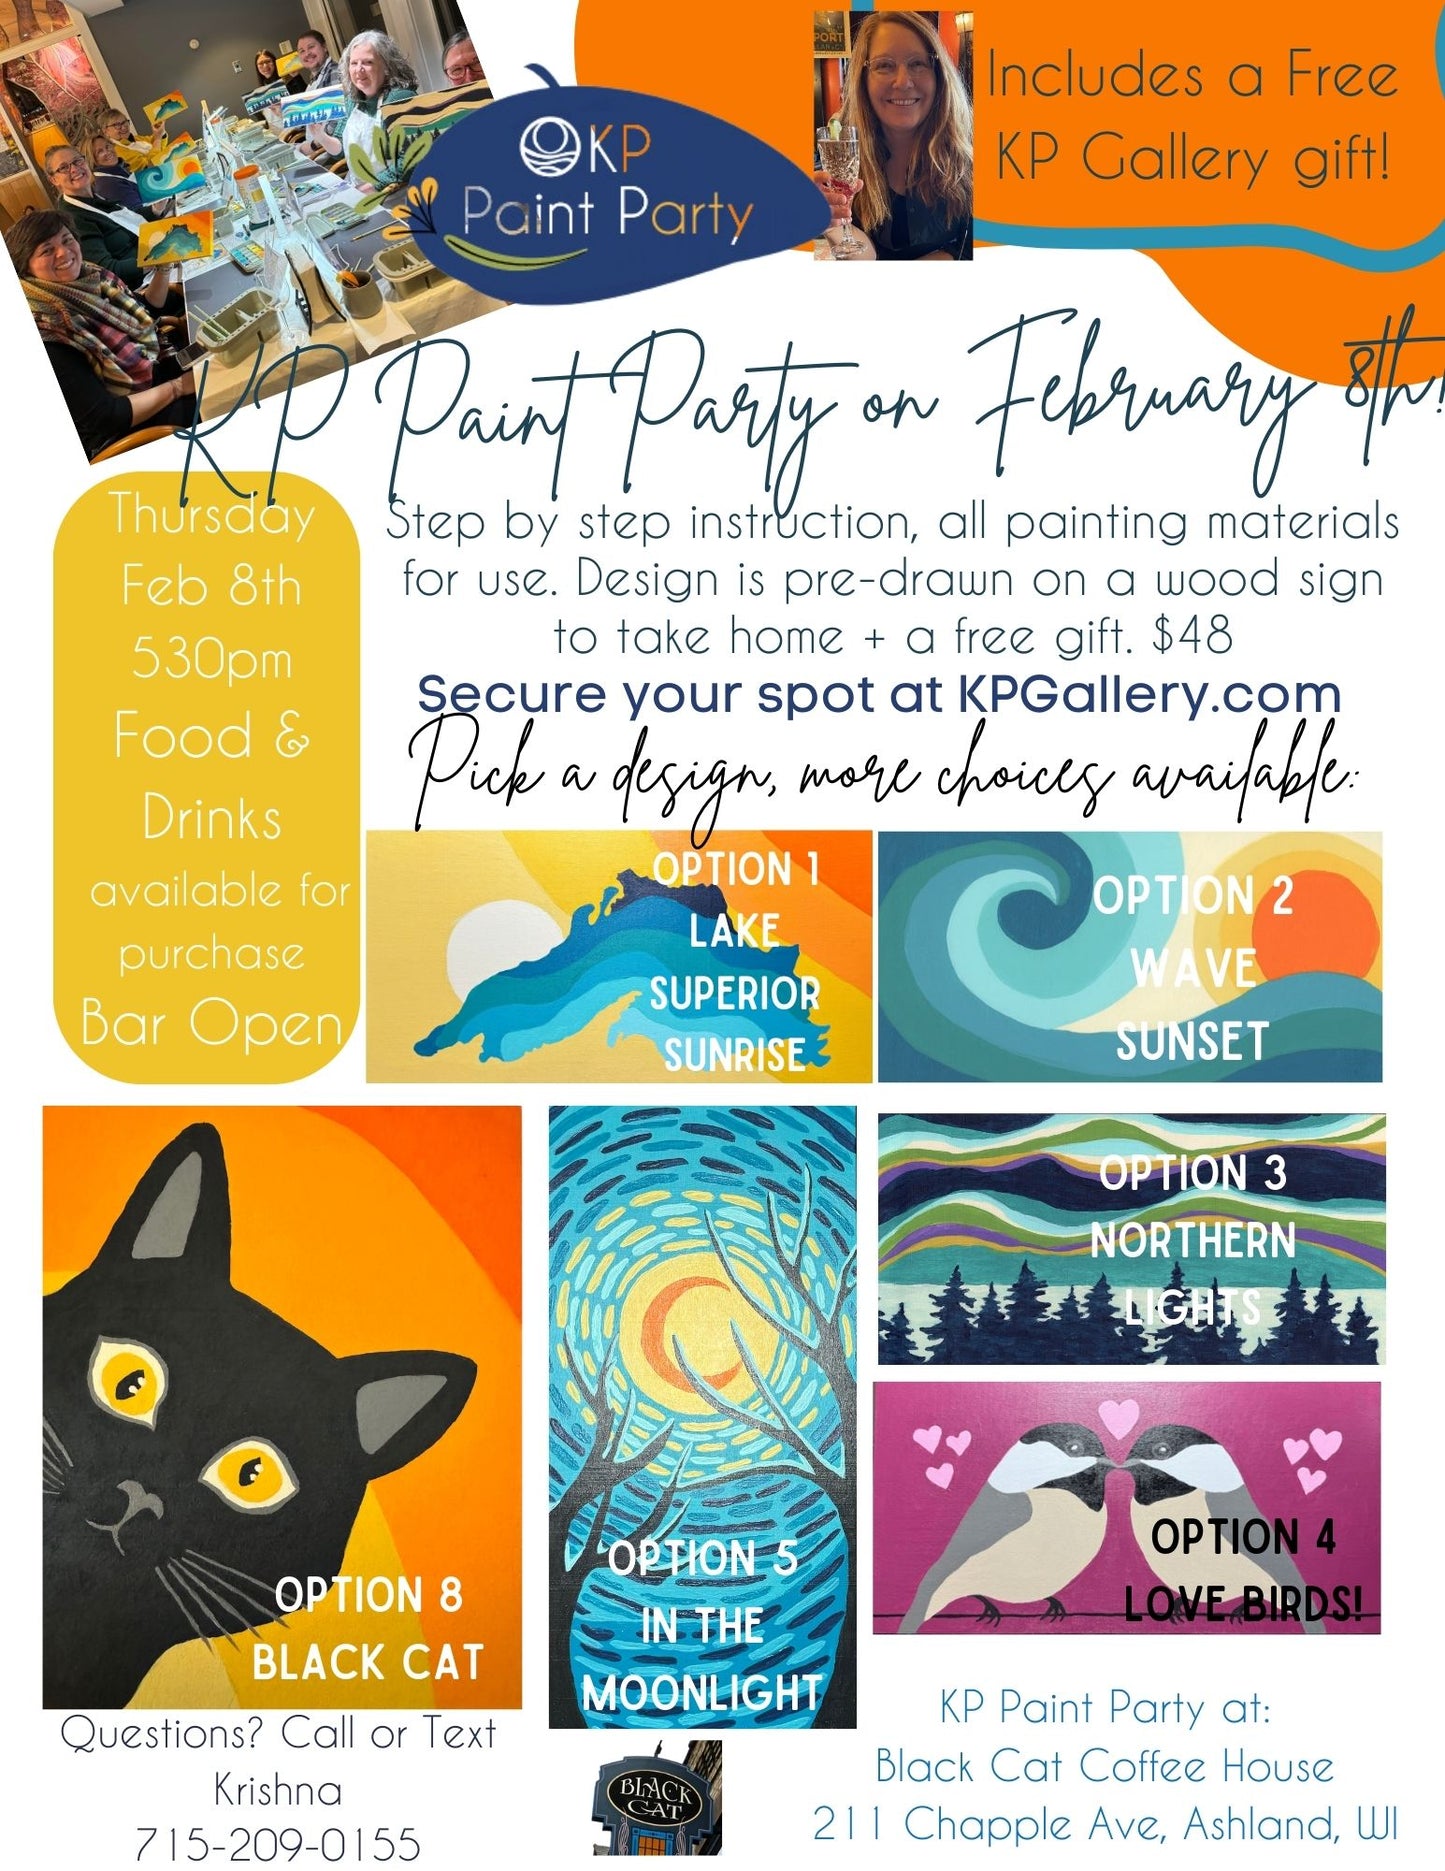 Feb 8th Paint Party!!! Choose your Design at the Black Cat Coffeehouse